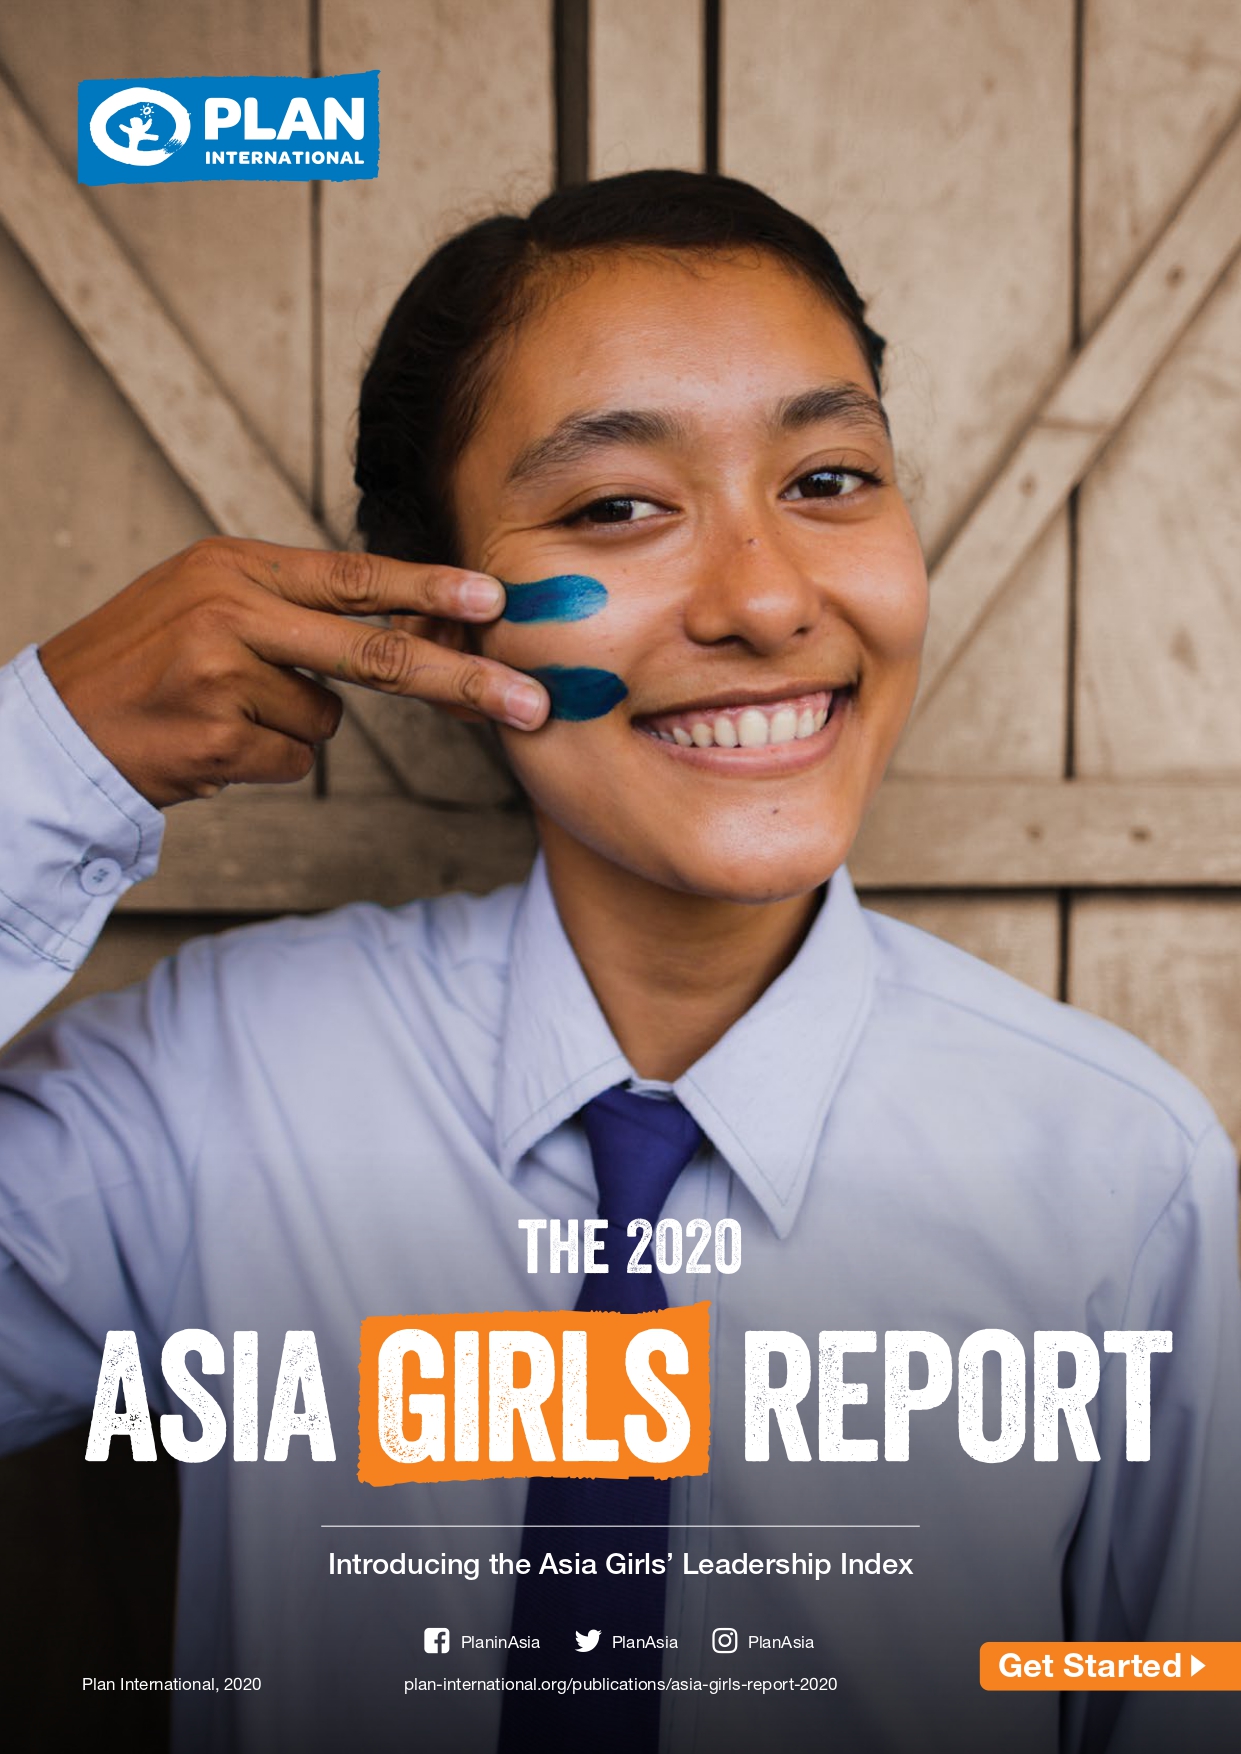 The 2020 Asia Girls Report